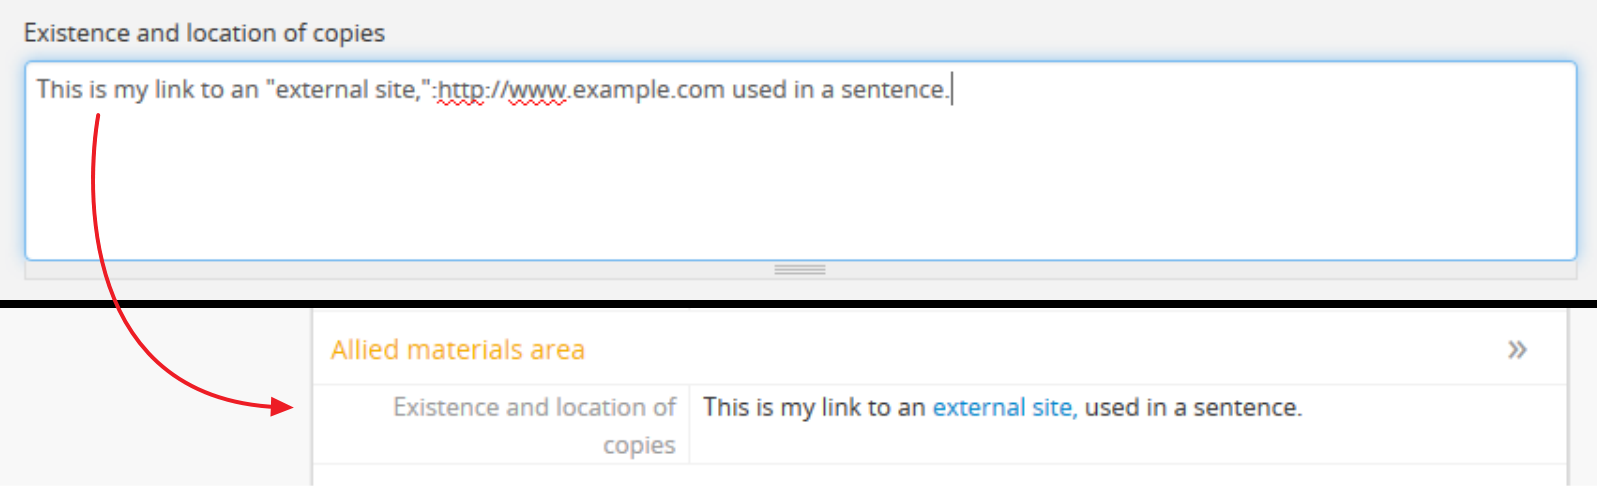 An example of the linking format compared in an edit and view page